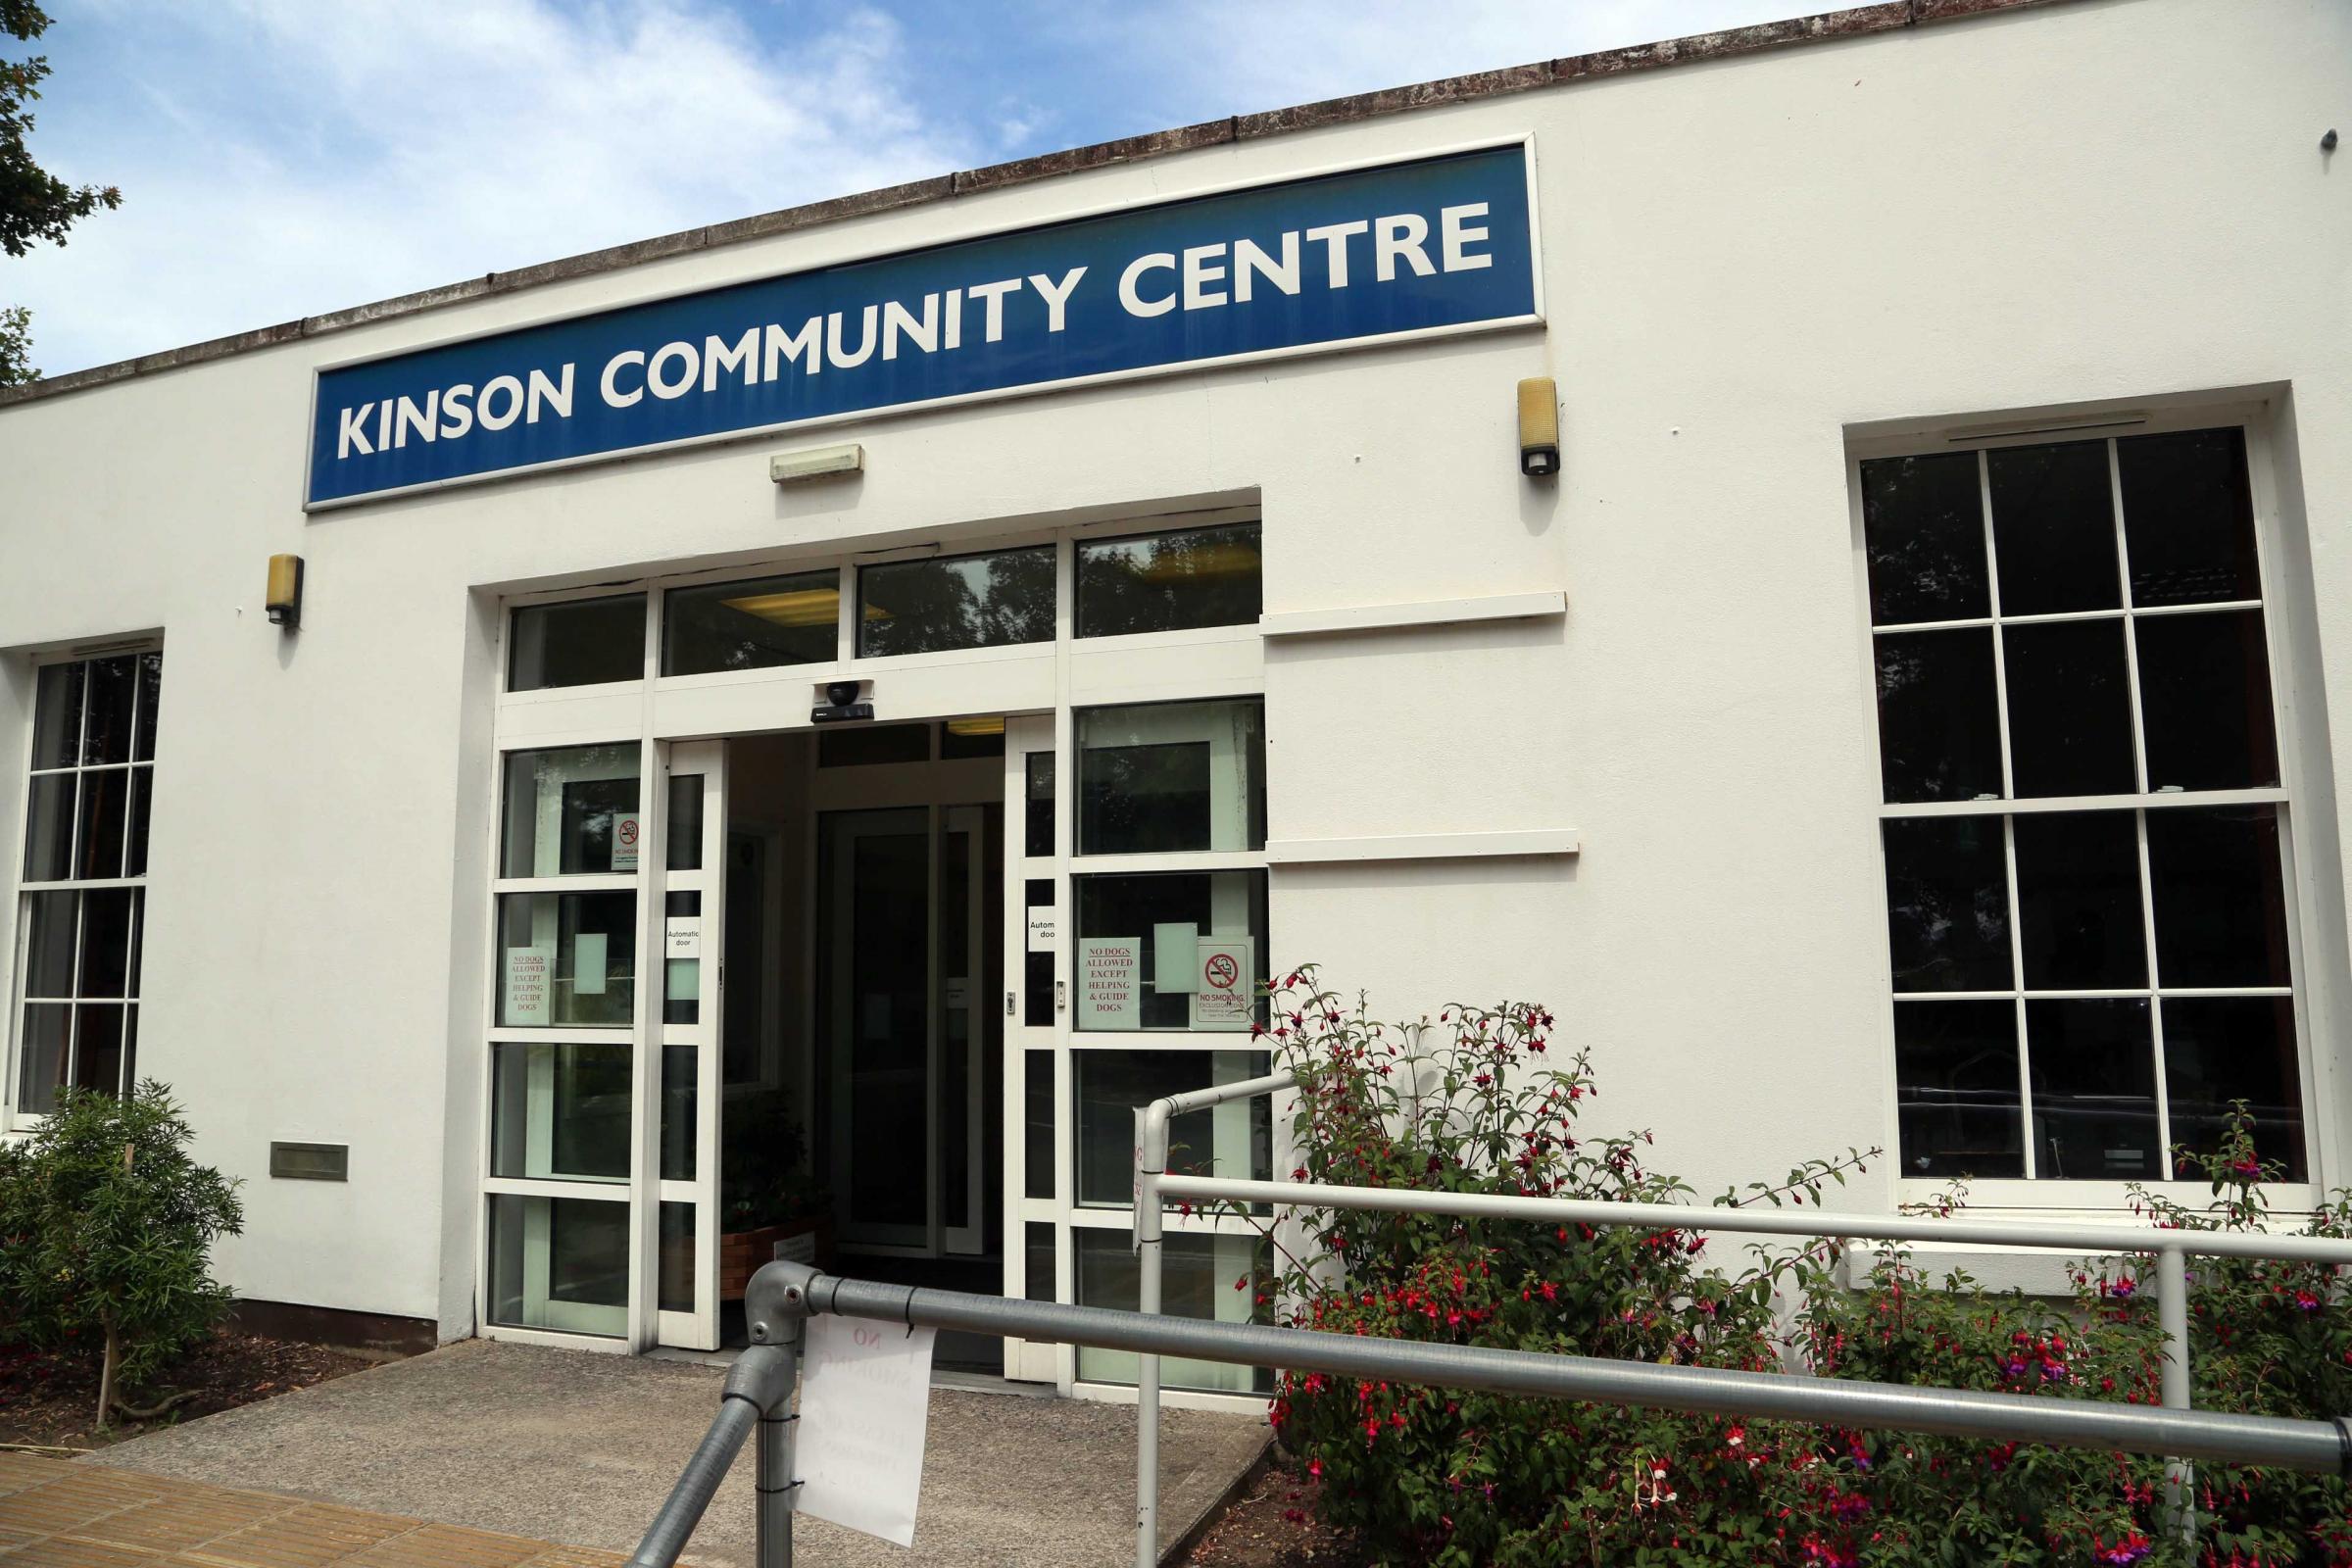 'Mismanagement' at community centre probe after 'more than £100,000 disappears from books'